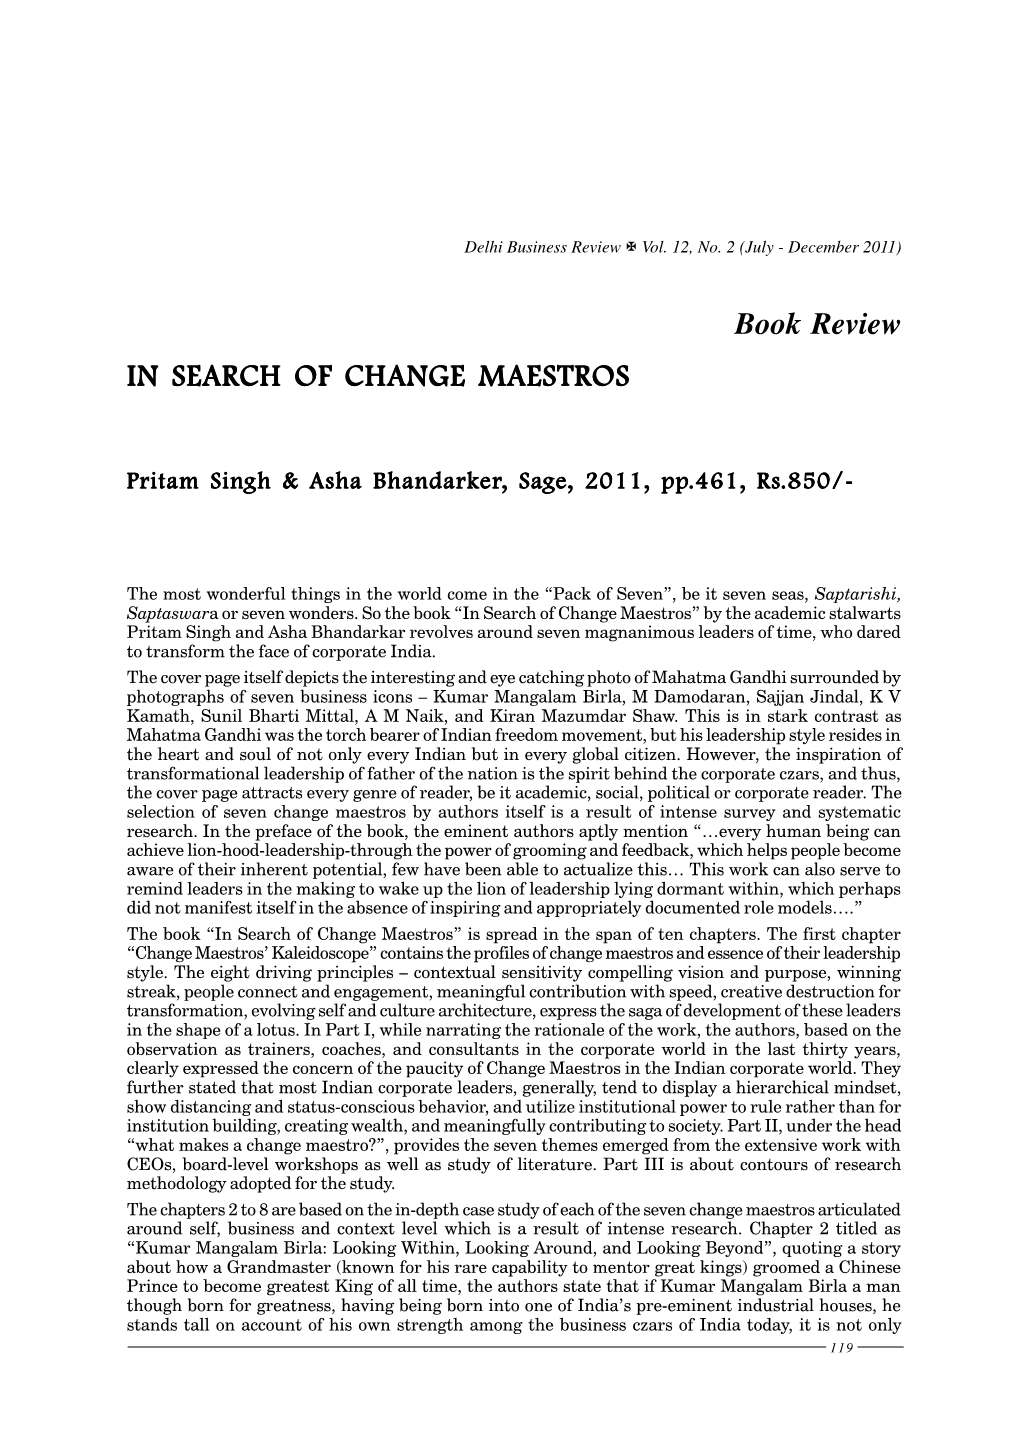 IN SEARCH of CHANGE MAESTROS Book Review